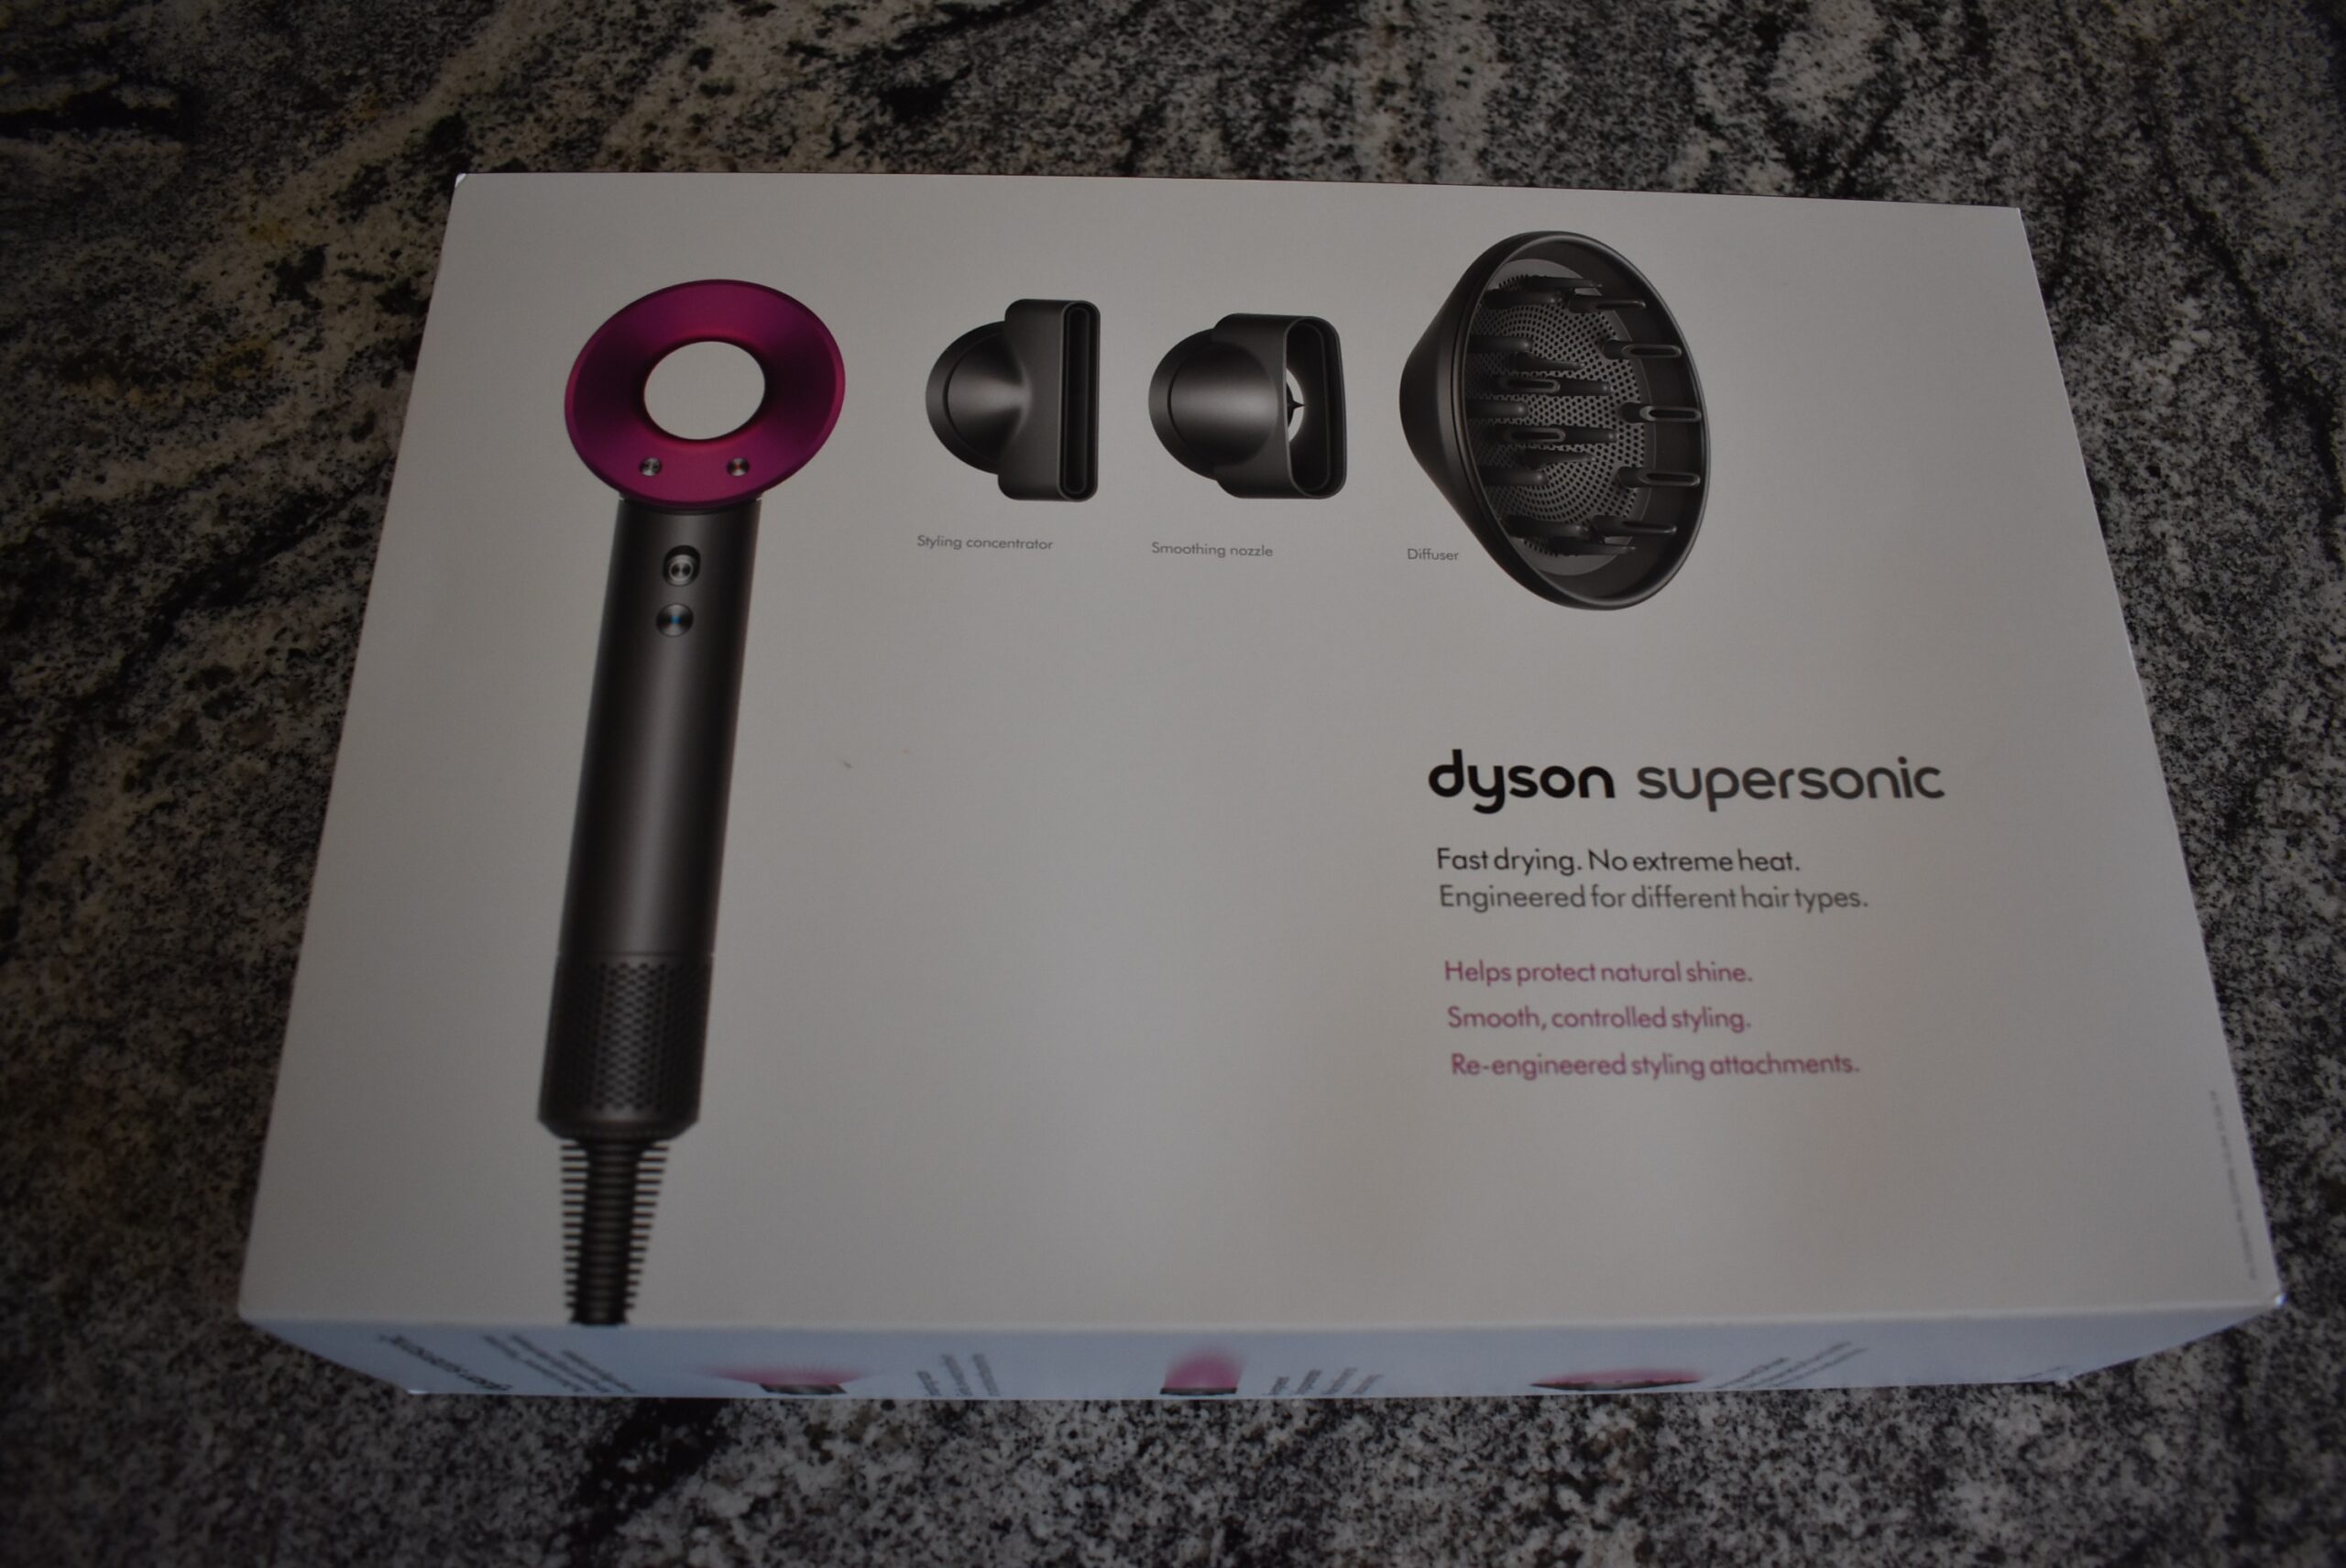 For a dyson hair dryer review, the front of the retail box sits on a grey counter